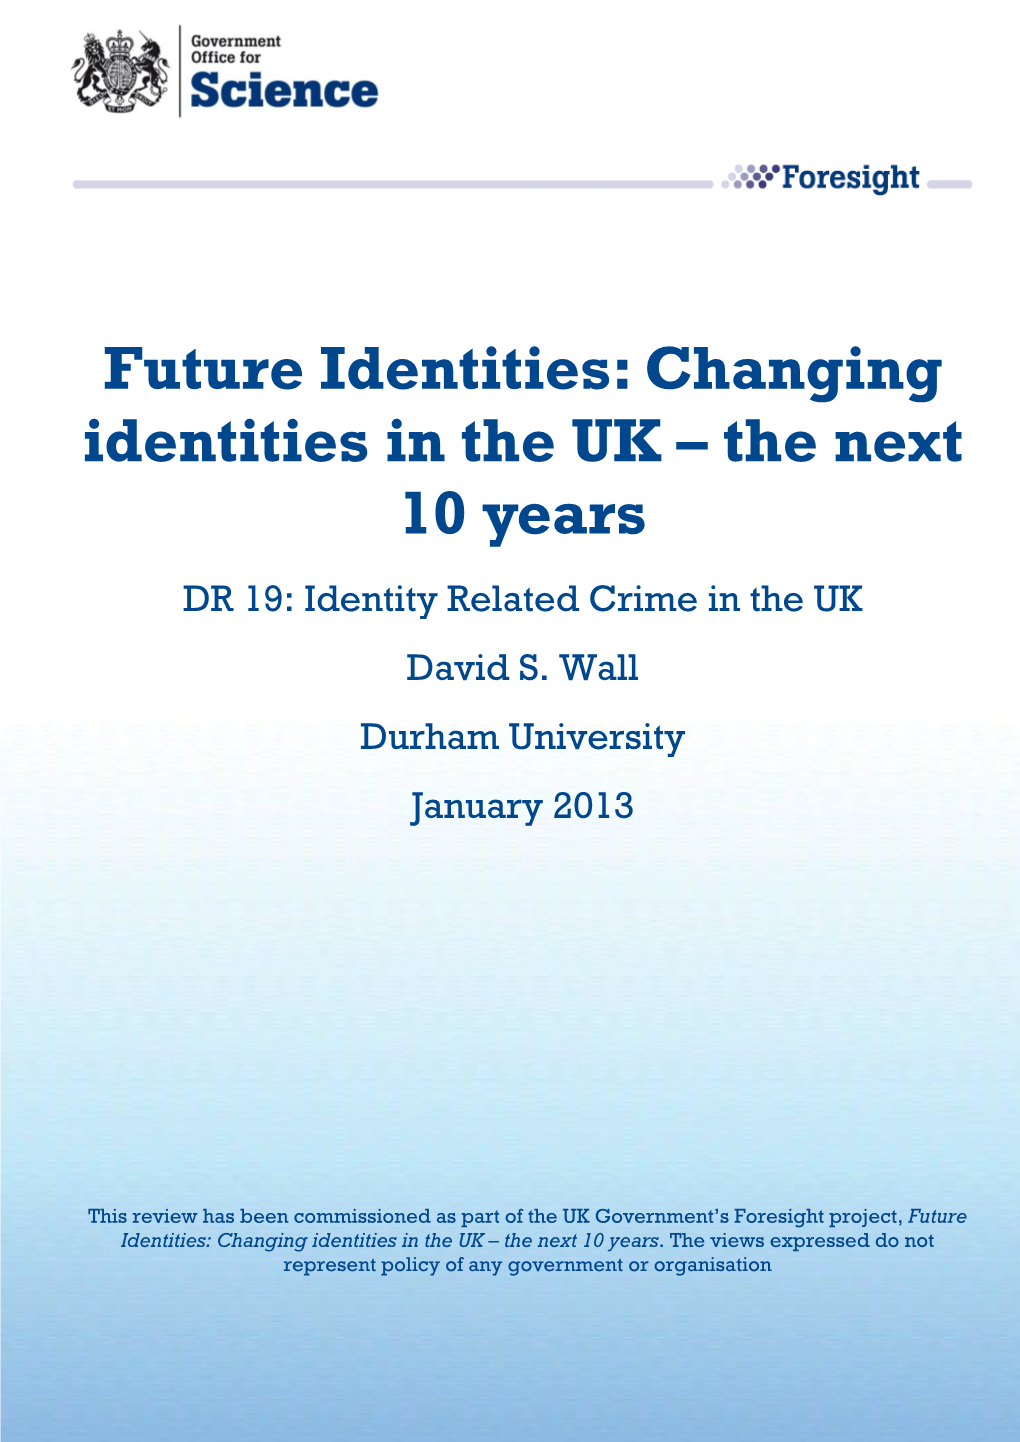 Future Identities: Changing Identities in the UK – the Next 10 Years DR 19: Identity Related Crime in the UK David S